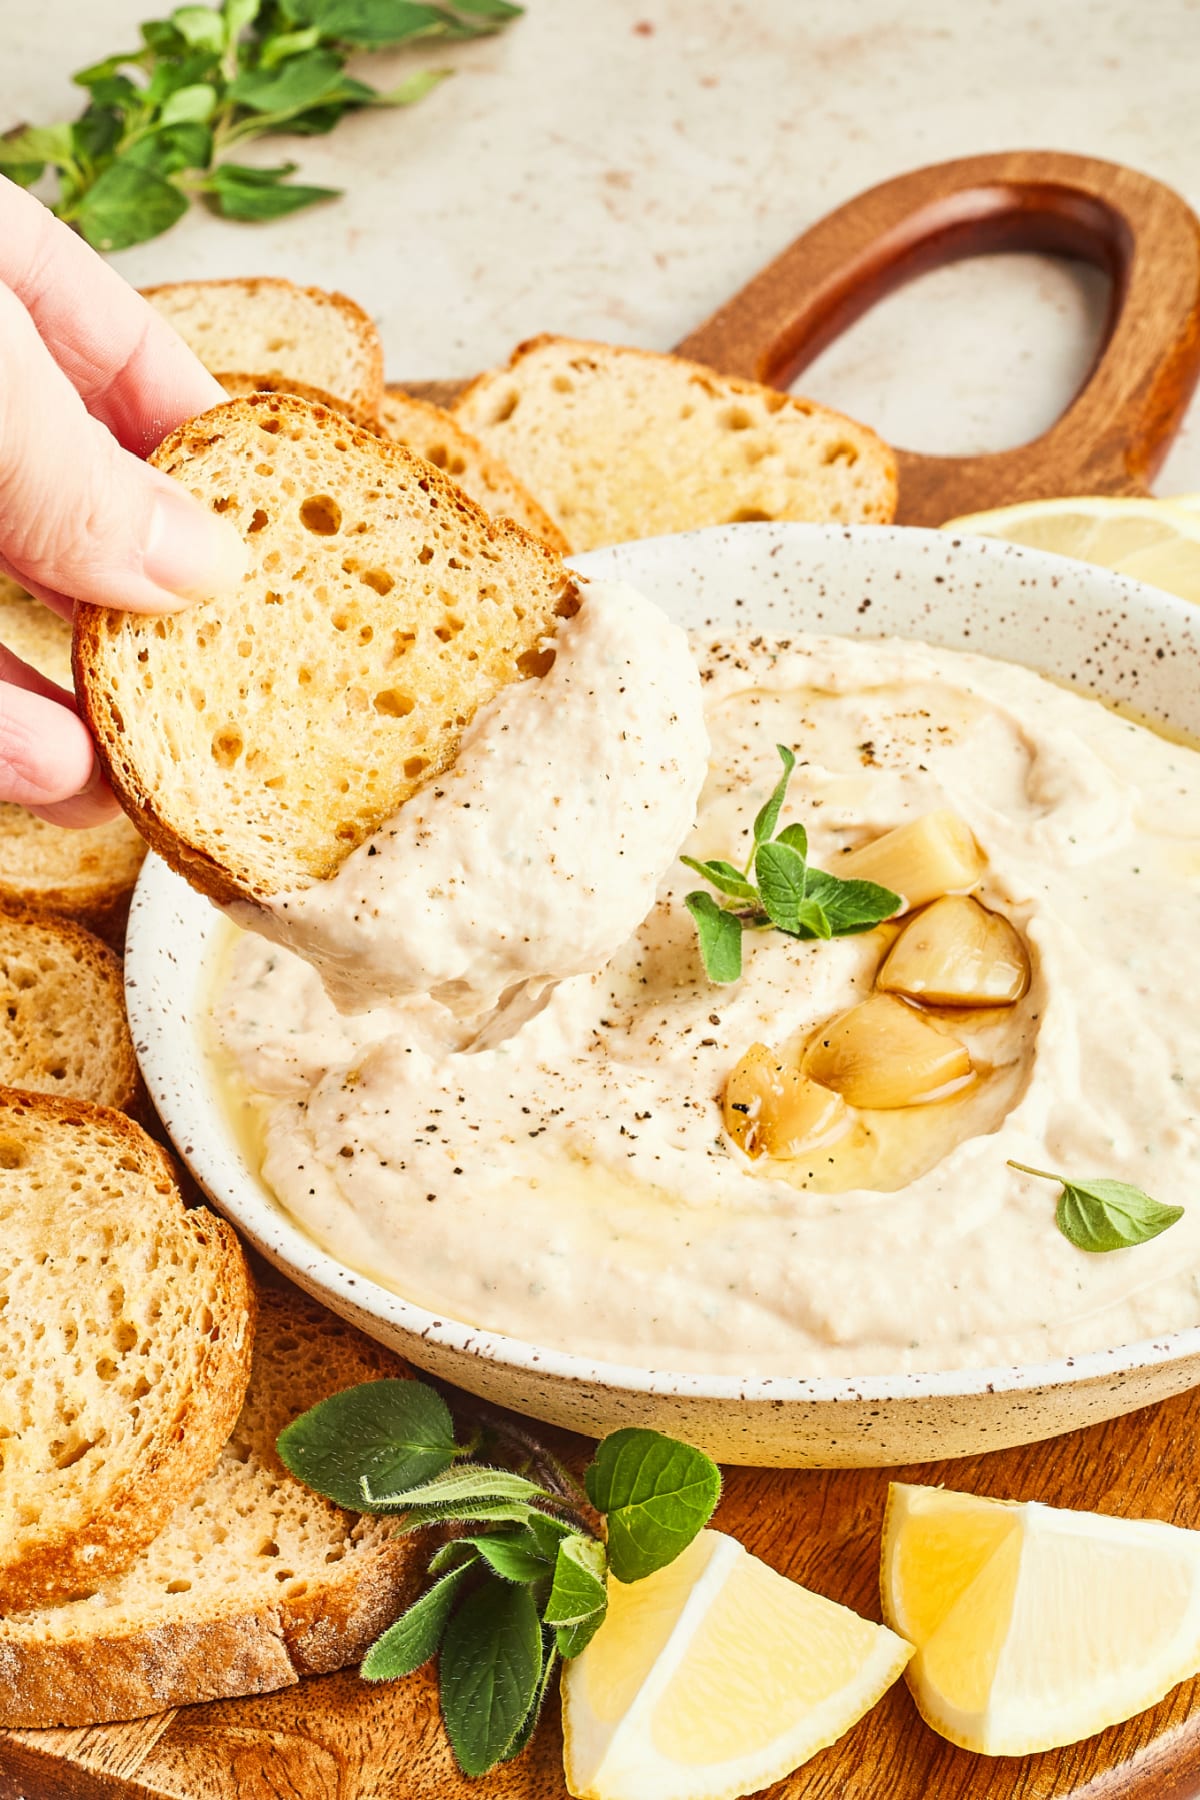 A hand dipping a slice of toasted baguette into a bowl of white bean dip. The bowl of dip is garnished with several roasted garlic cloves and fresh oregano leaves, and sits on a round wooden board with fresh lemon wedges and toasted baguette slices.